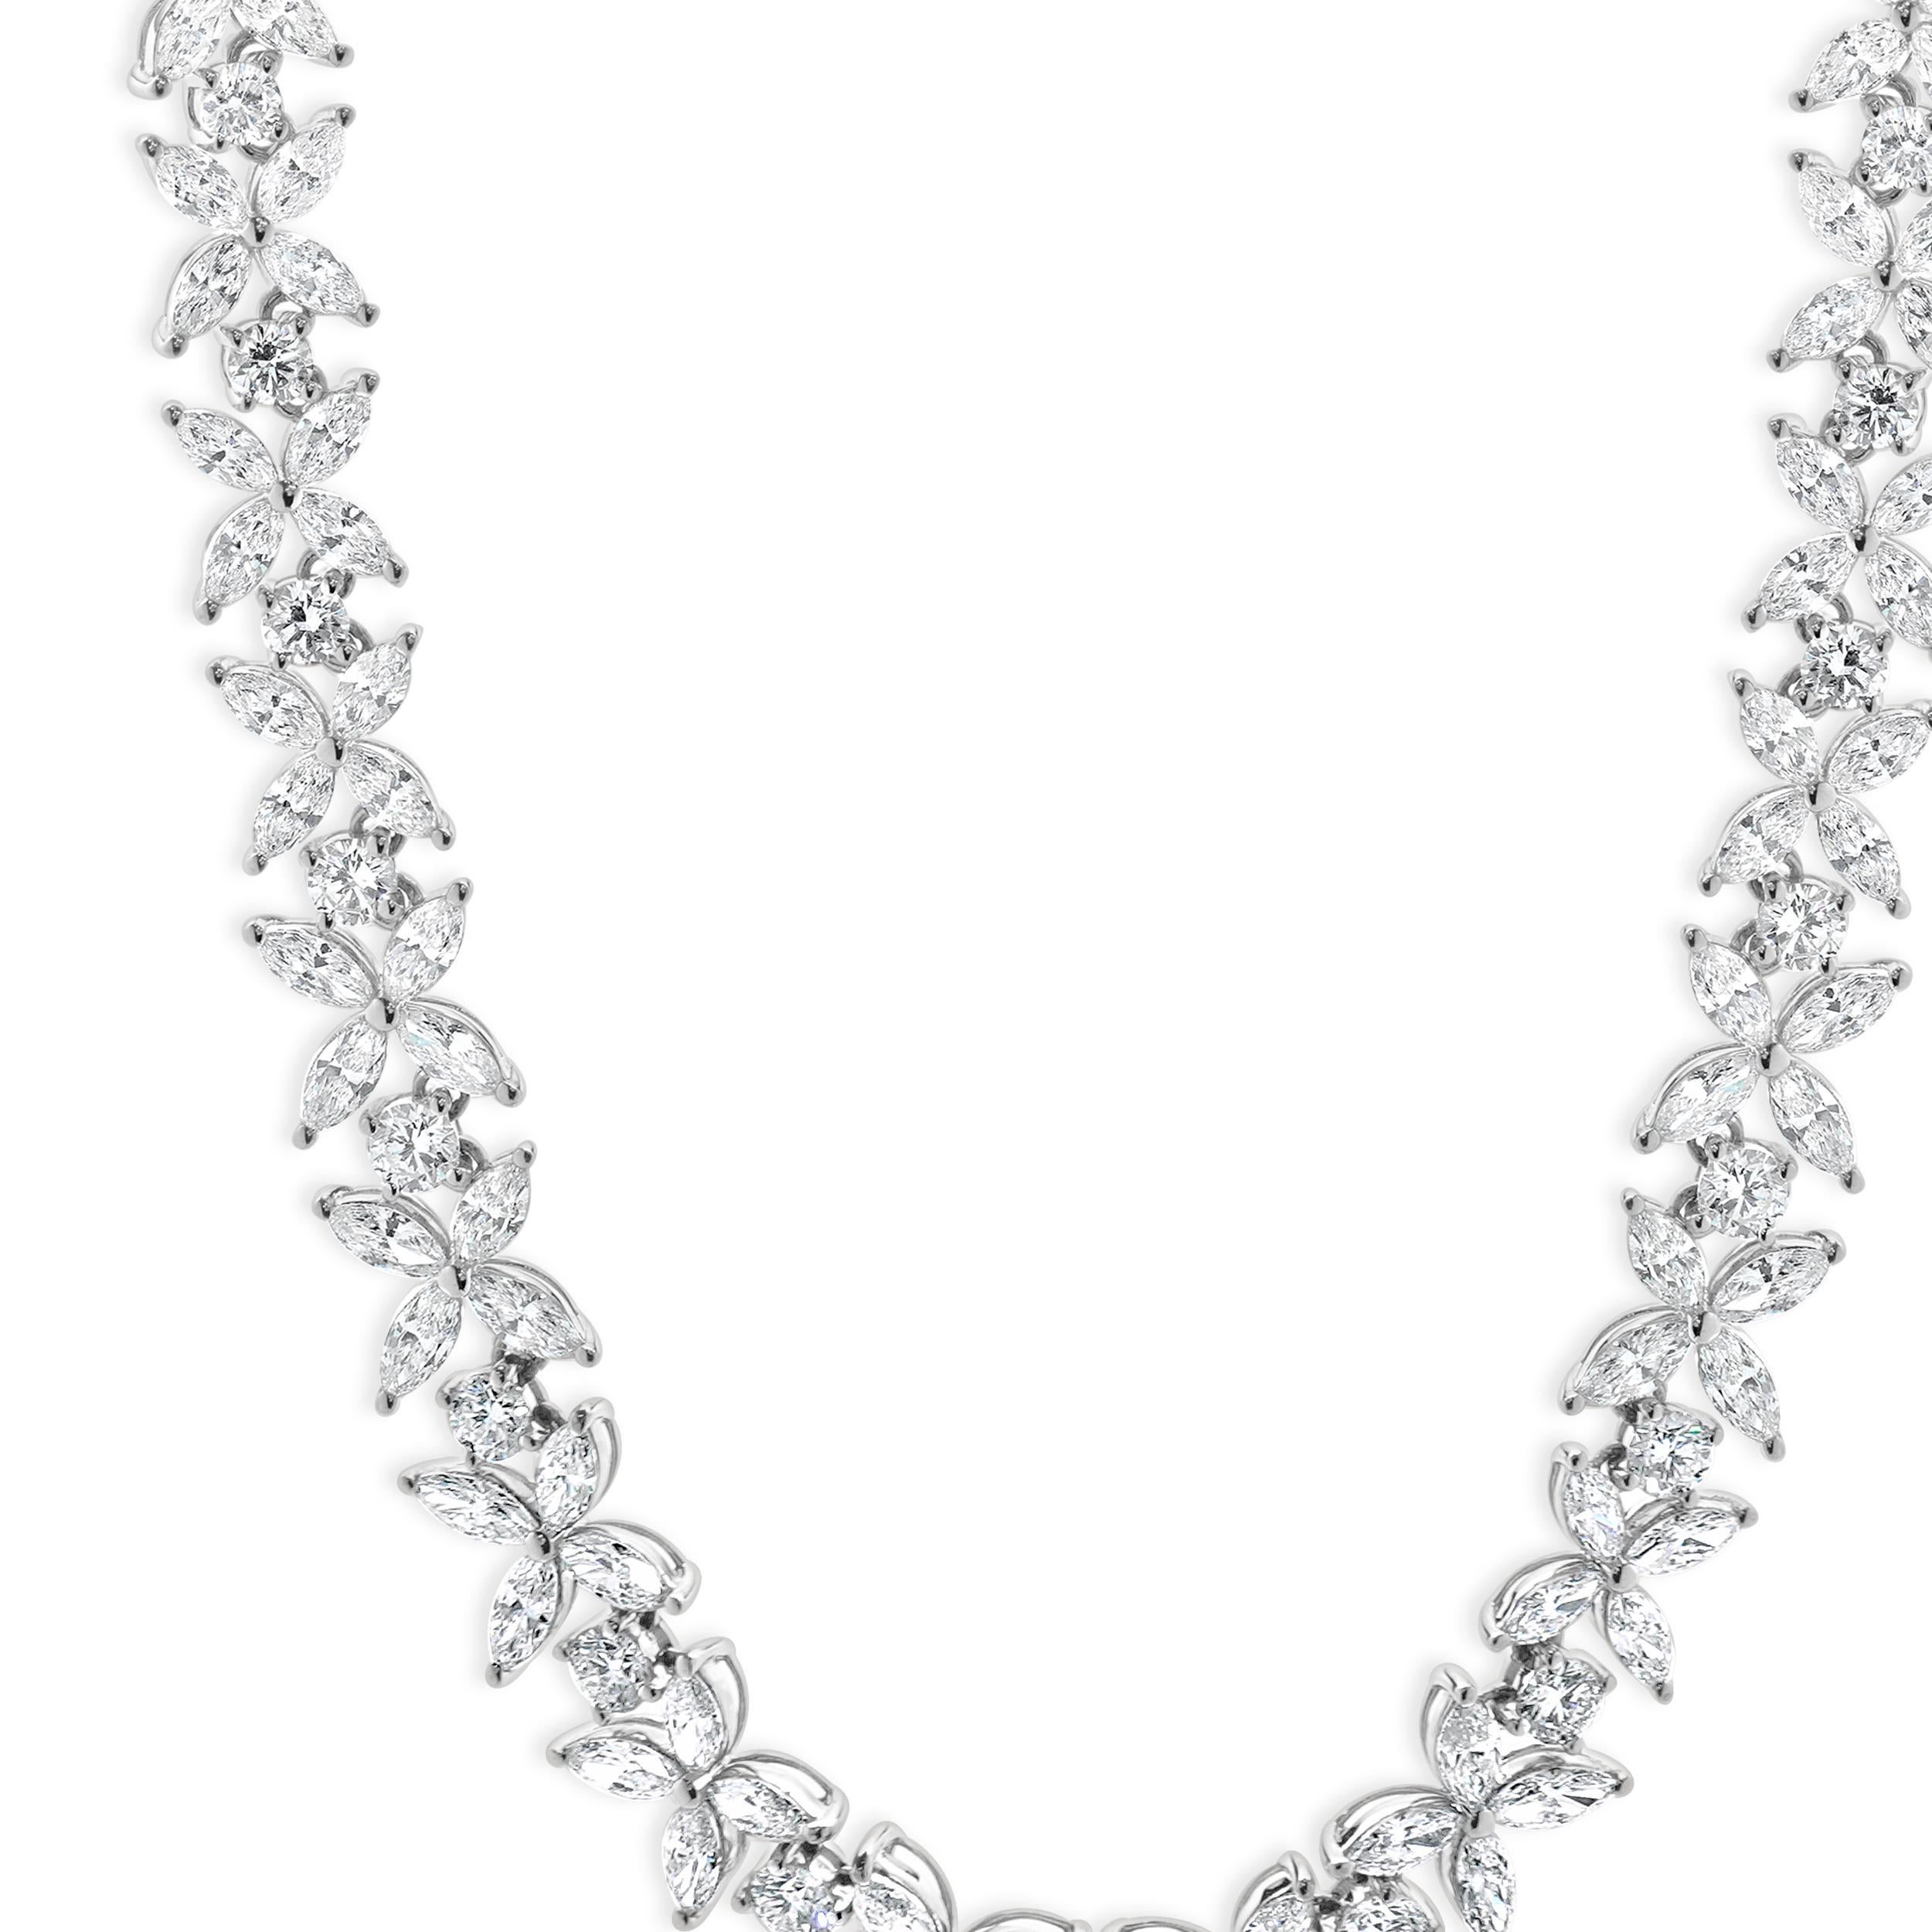 Designer: custom
Material: 18K white gold
Diamonds: 144 round brilliant & marquise cut = 12.82cttw
Color: G / H
Clarity: VS-SI1
Dimensions: necklace measures 14-inches in length
Weight: 32.24 grams